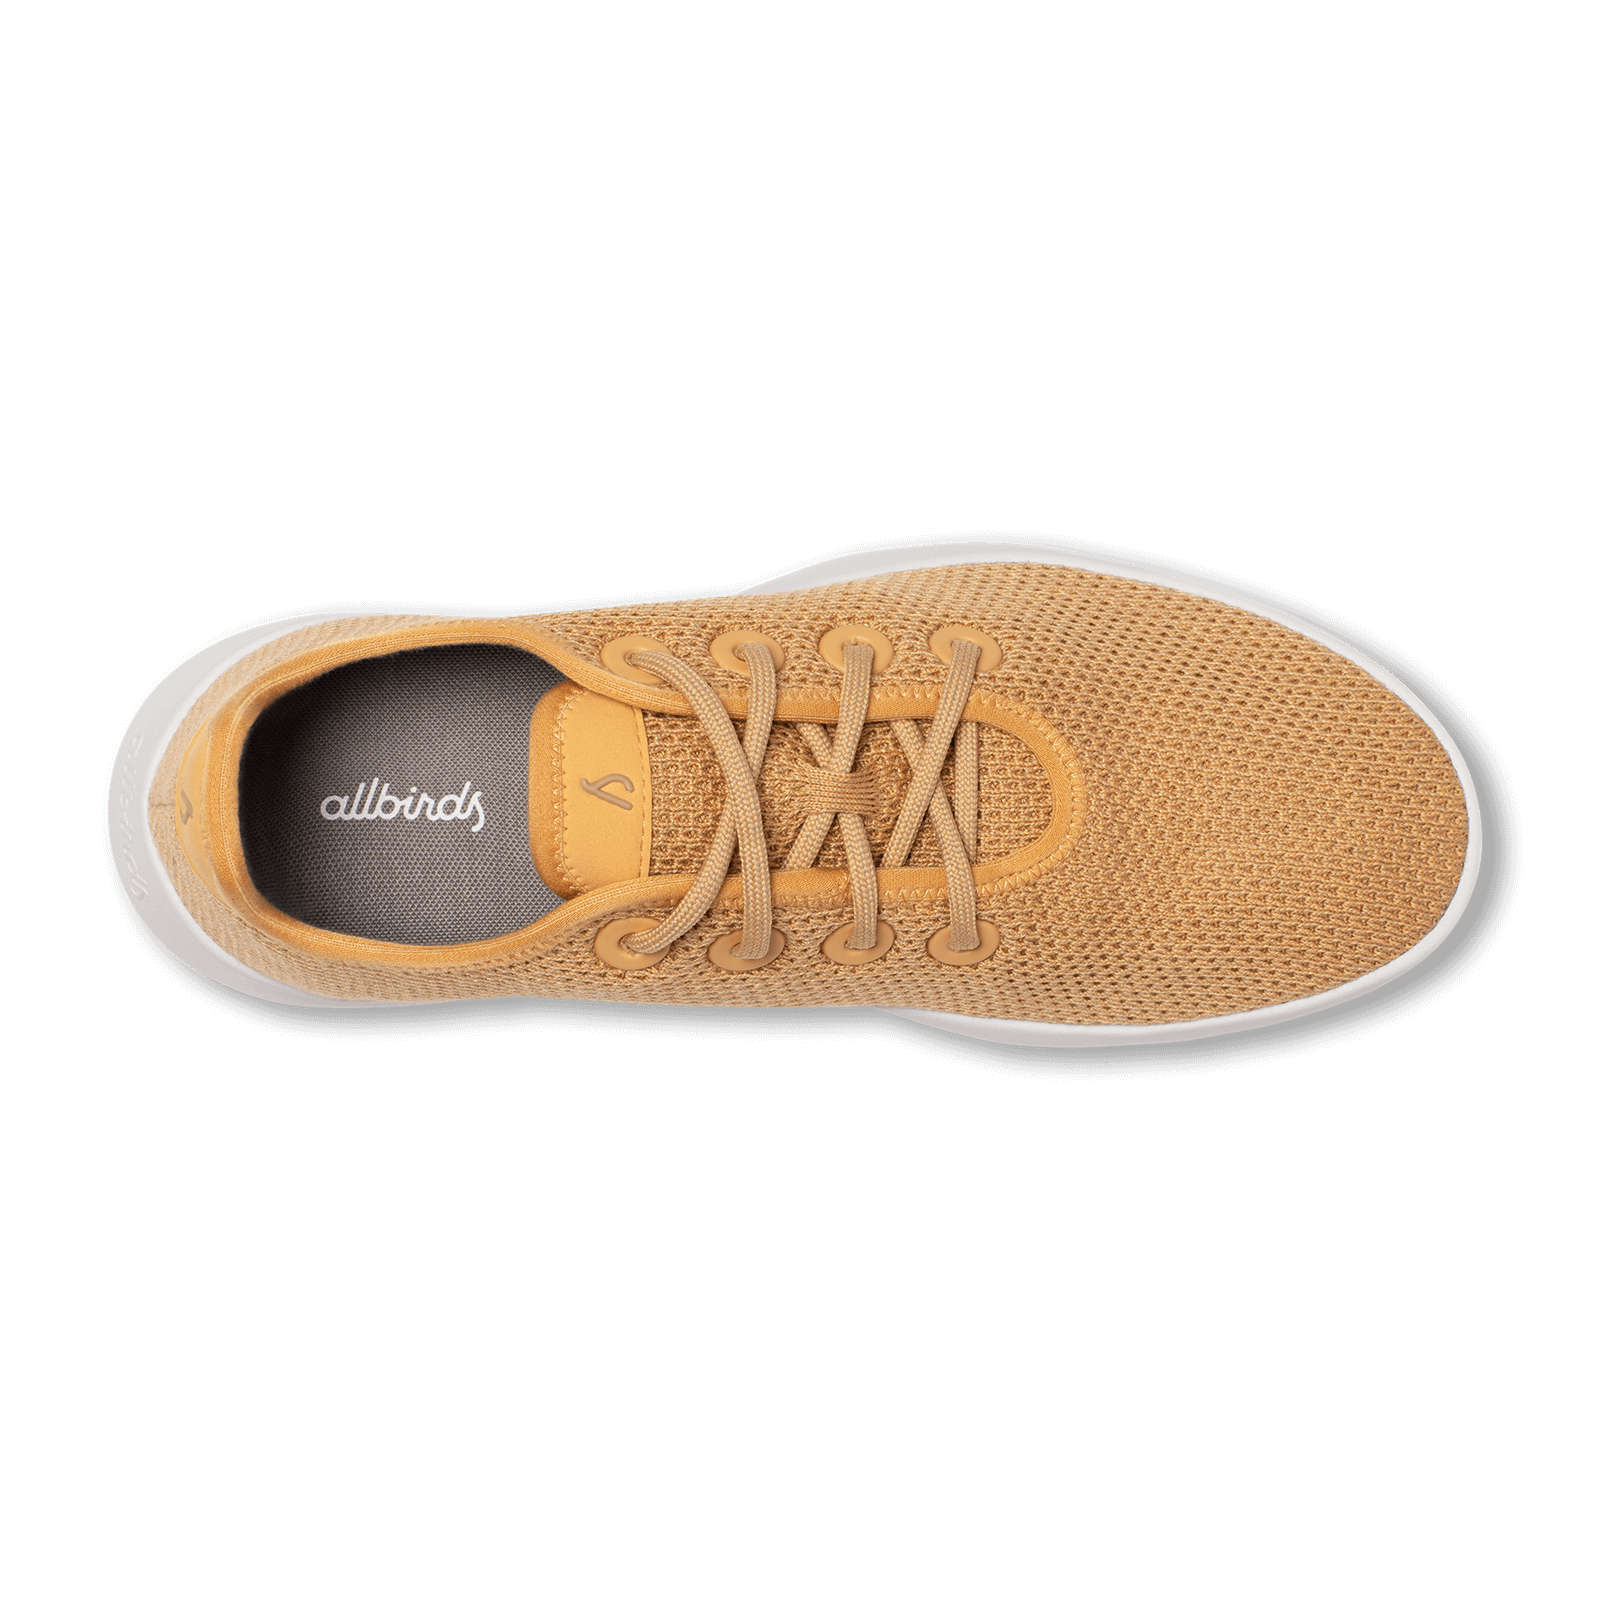 Men's Tree Runners - Forage Tan (Blizzard Sole)